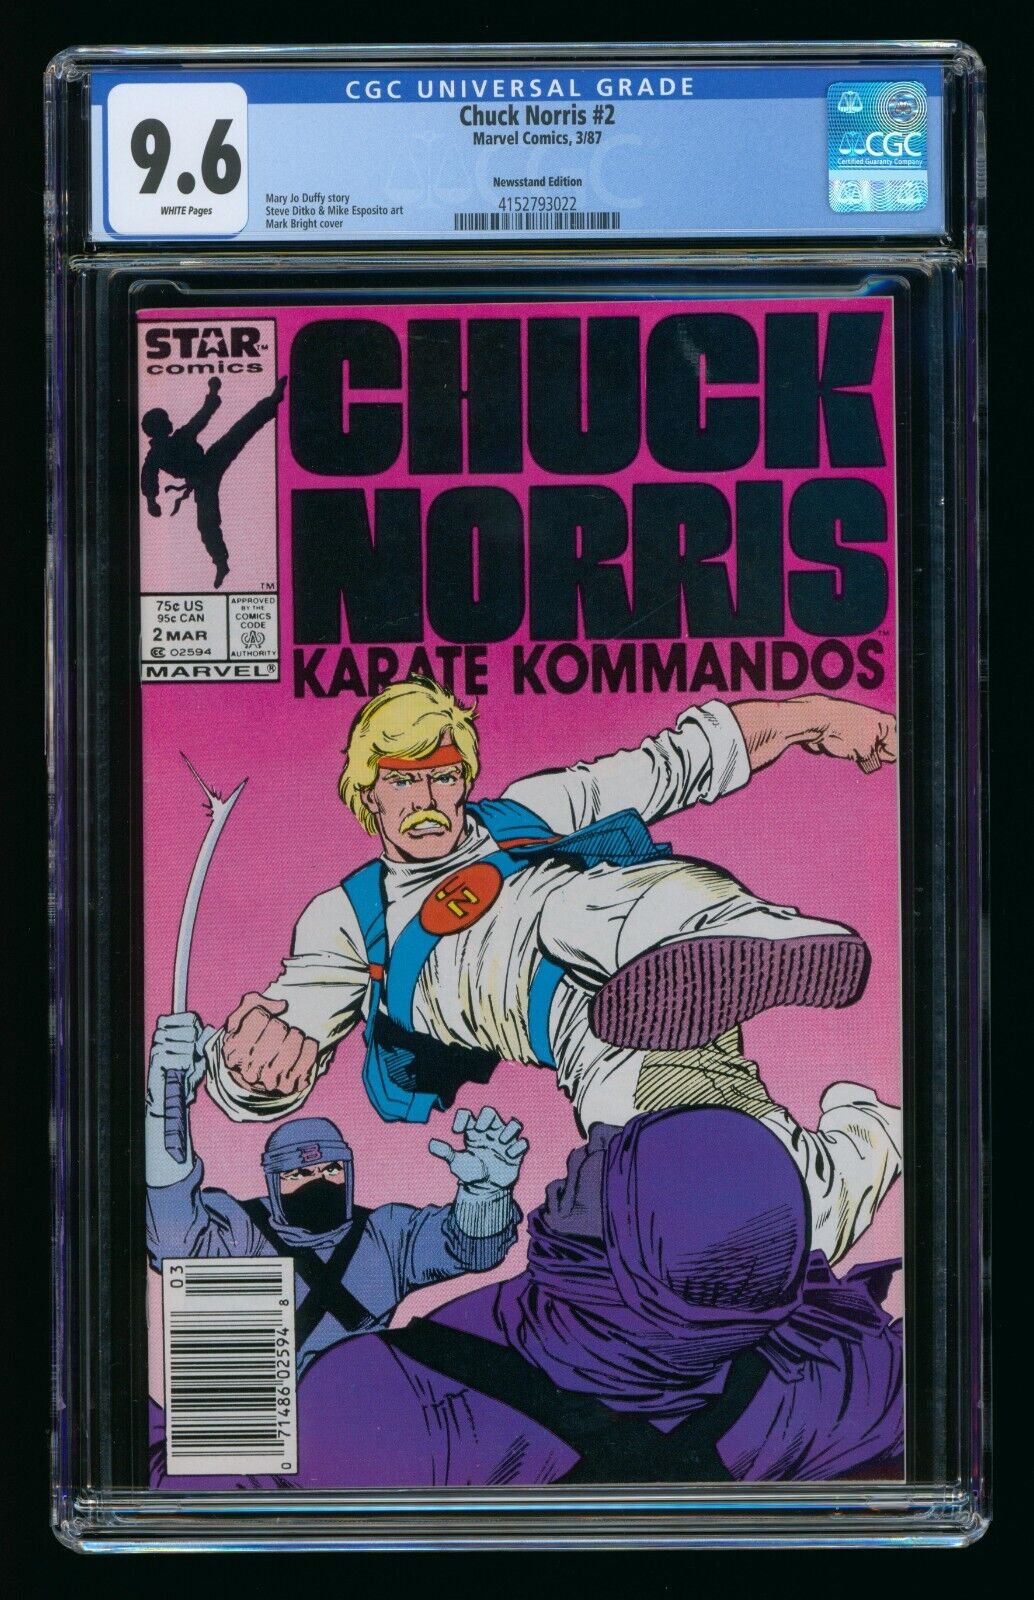 CHUCK NORRIS #2 (1987) CGC 9.6 NEWSSTAND EDITION WHITE PAGES